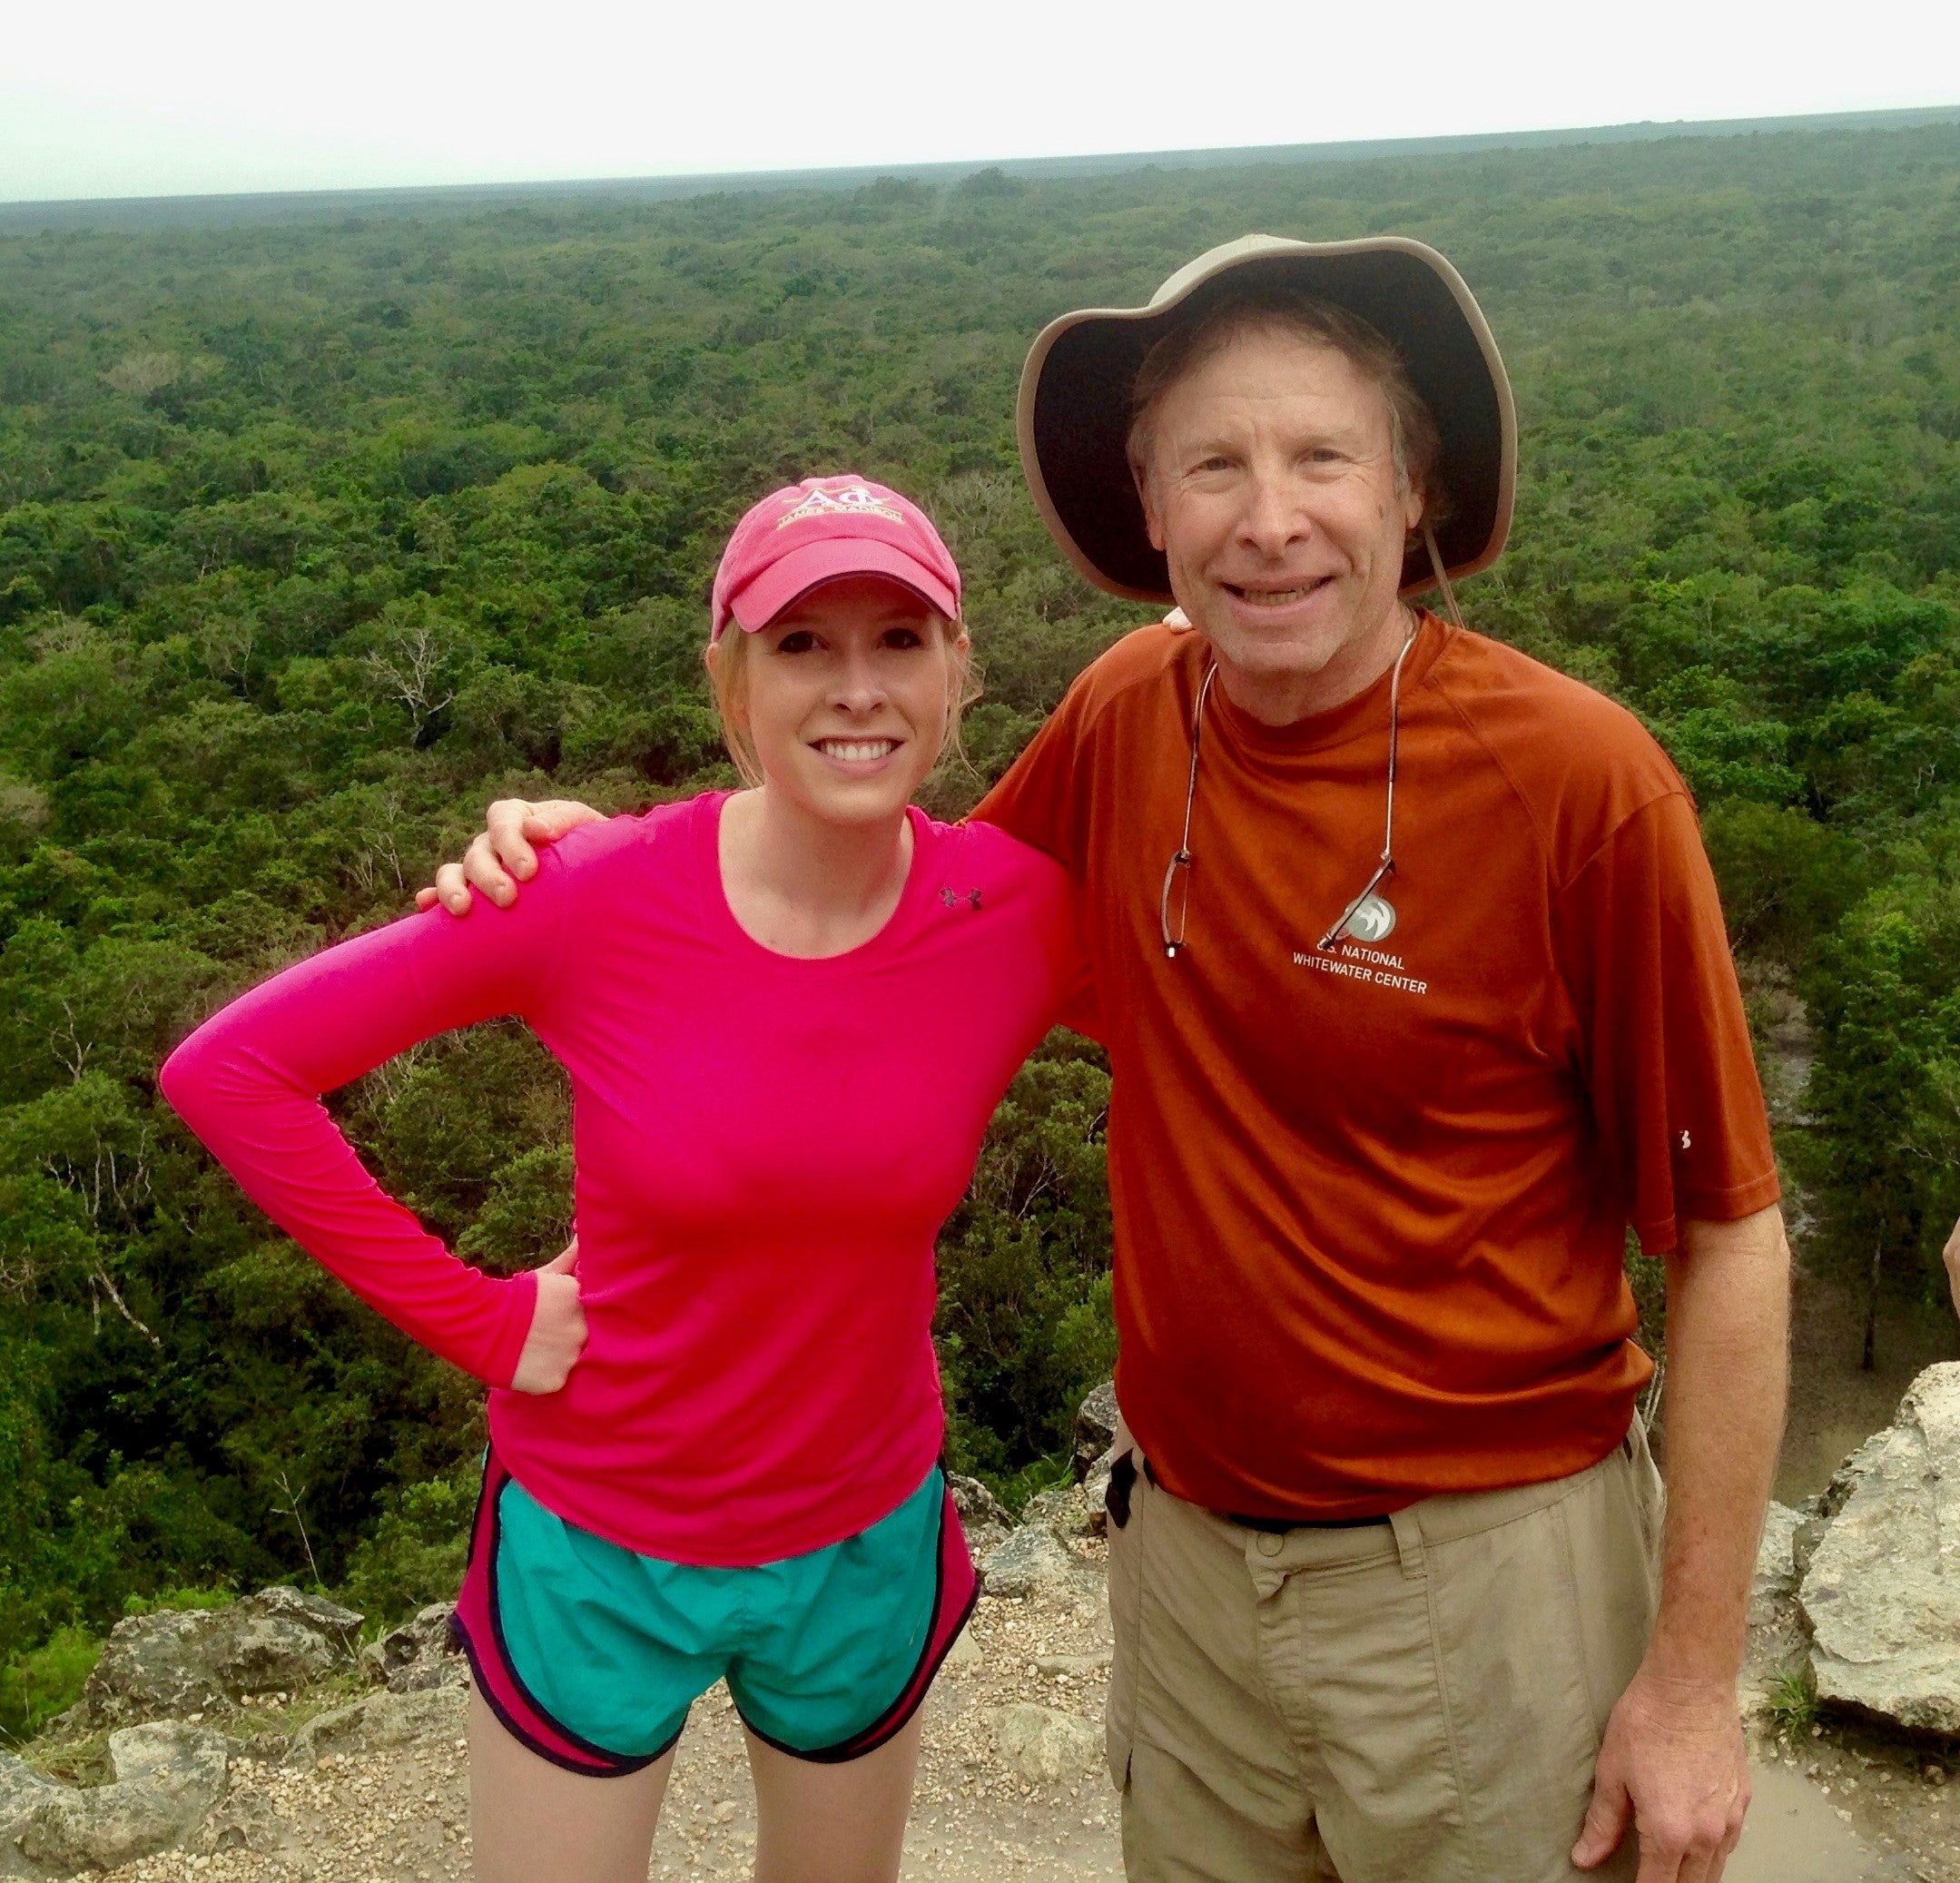 Reporter Alison Parker poses on vacation with her father, Andy - who is fighting social media giants to take down videos of her murder